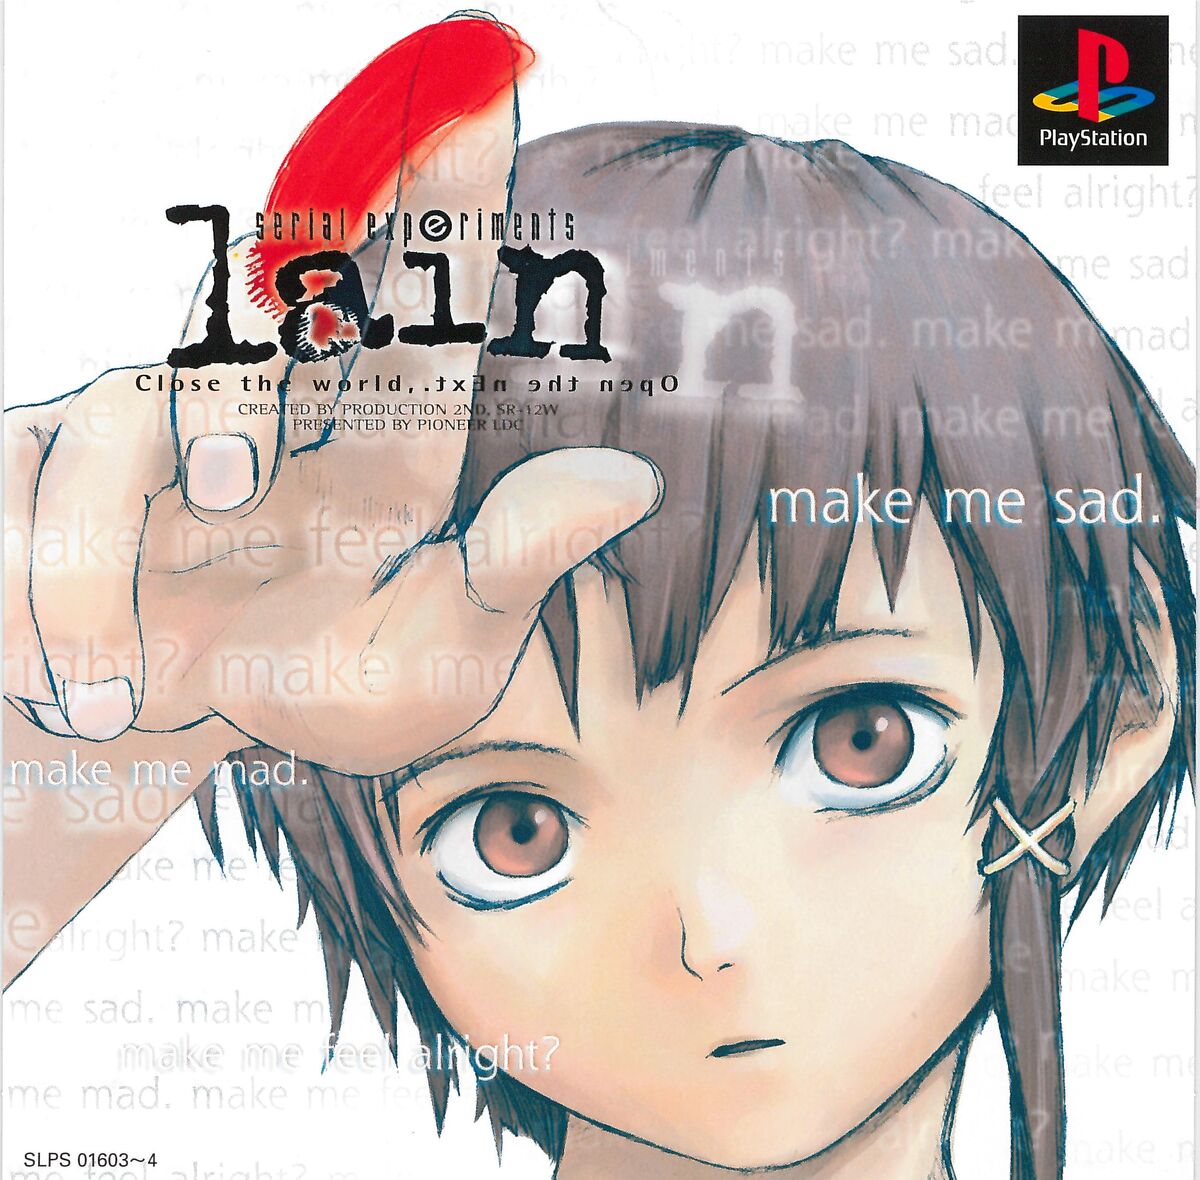 serial experiments lain 公式ガイド 攻略本 - ゲーム攻略本